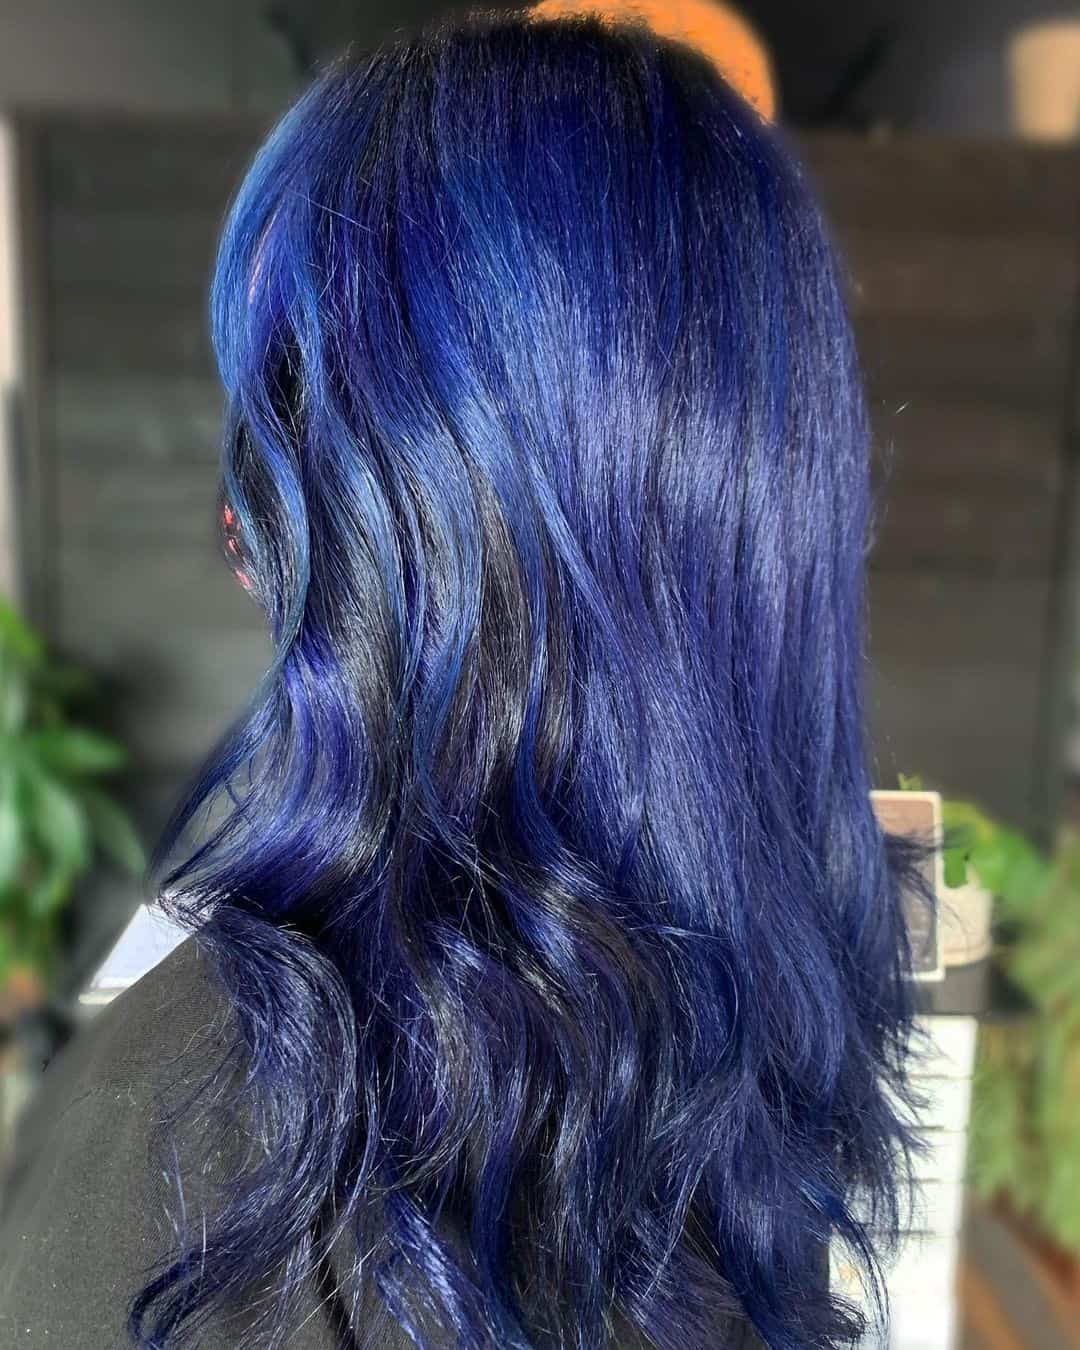 Black & Blue Hairstyles With Curls 